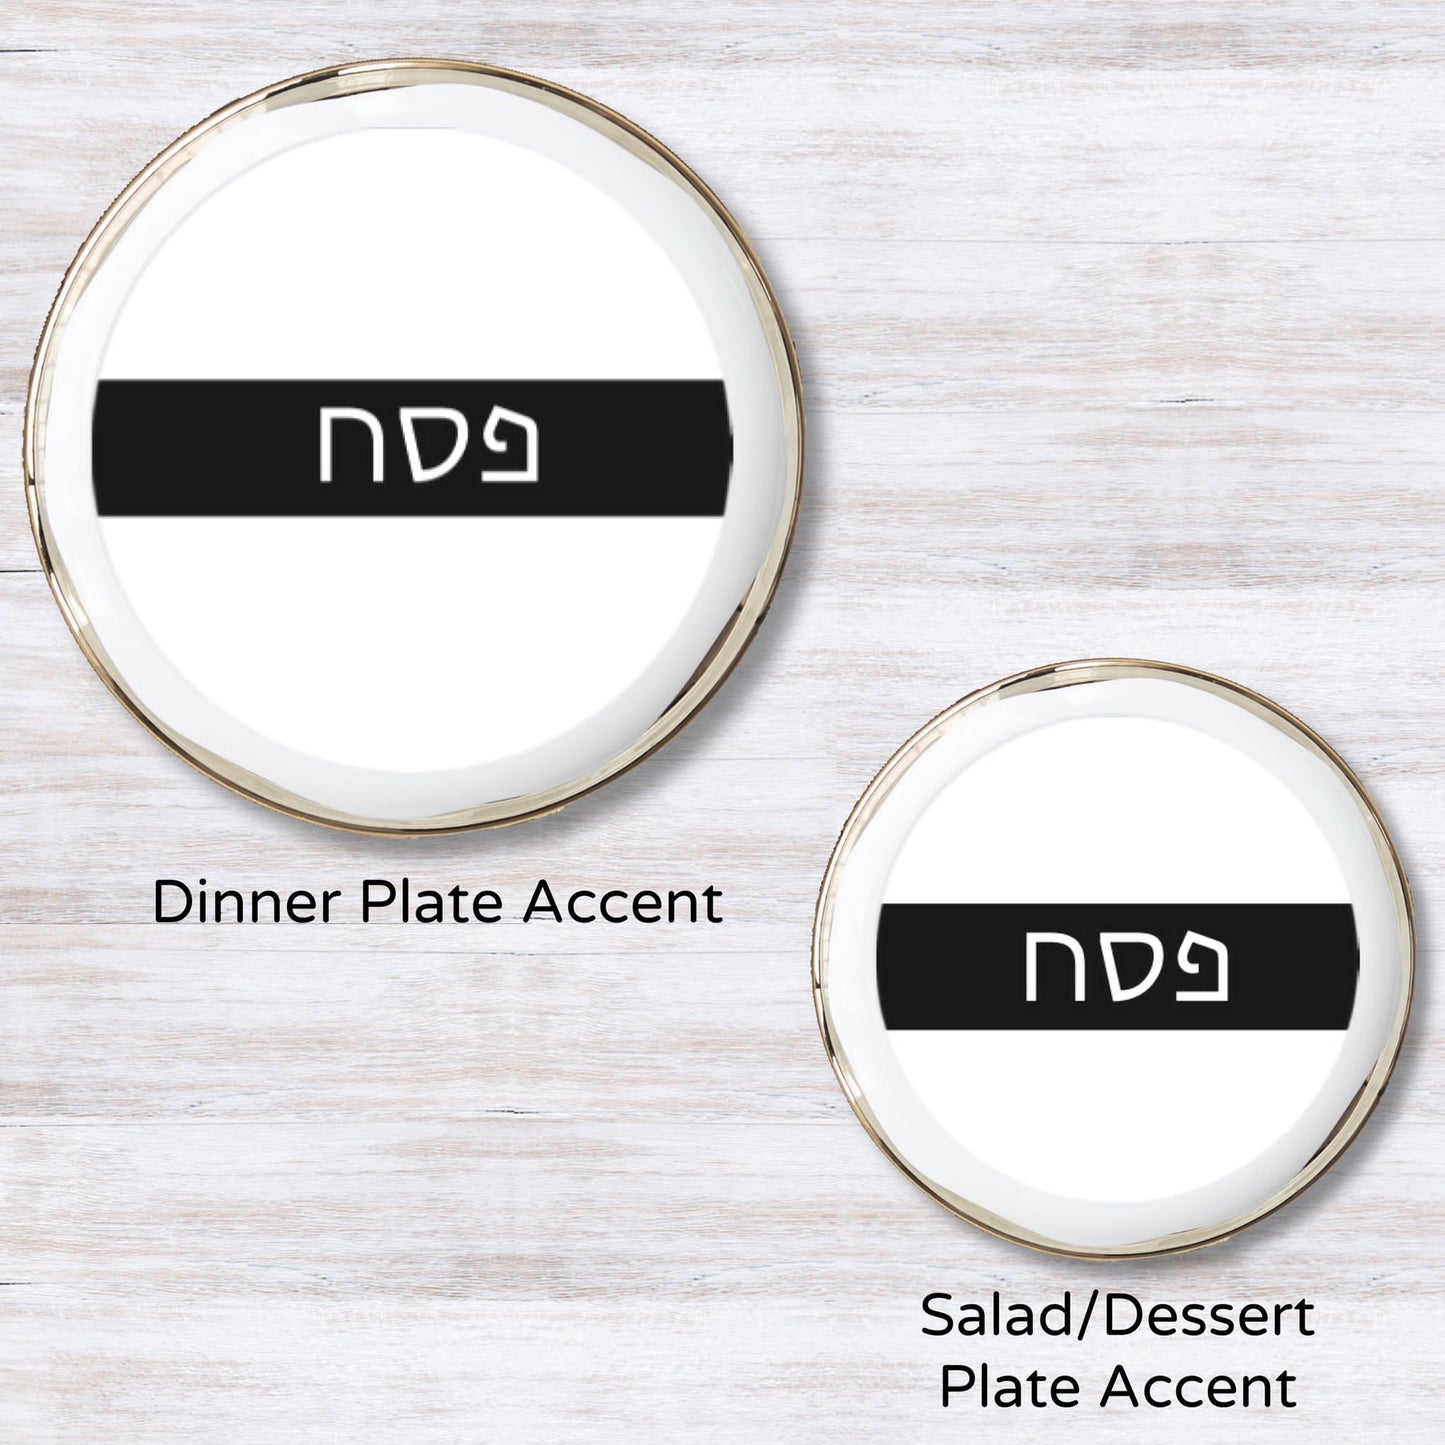 Pesach Plate Accent